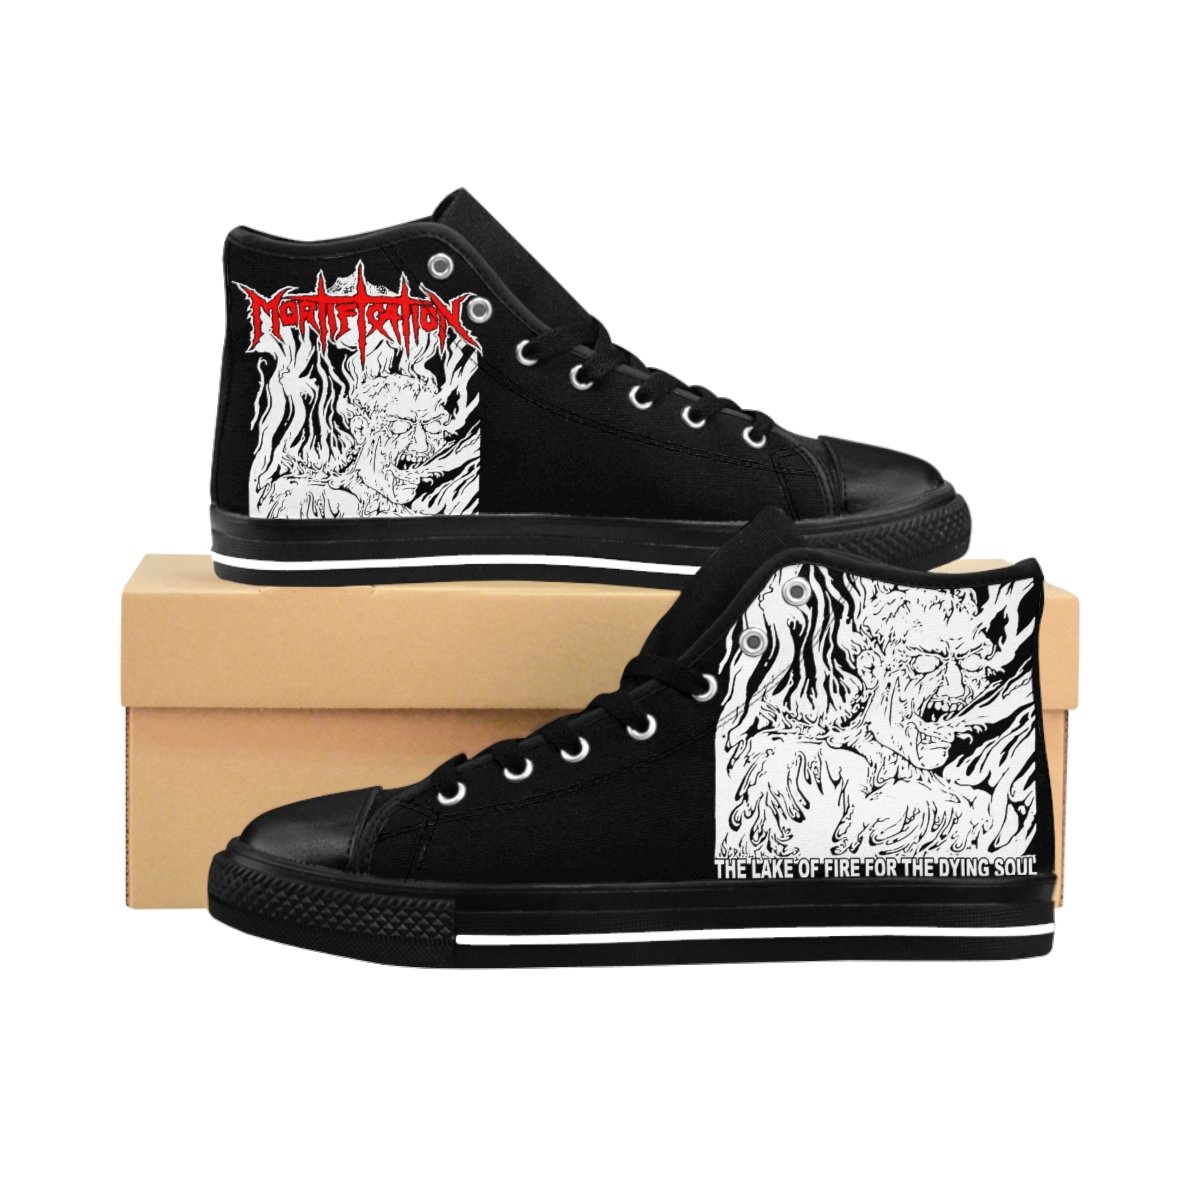 Mortification – The Lake of Fire Men’s High-top Sneakers